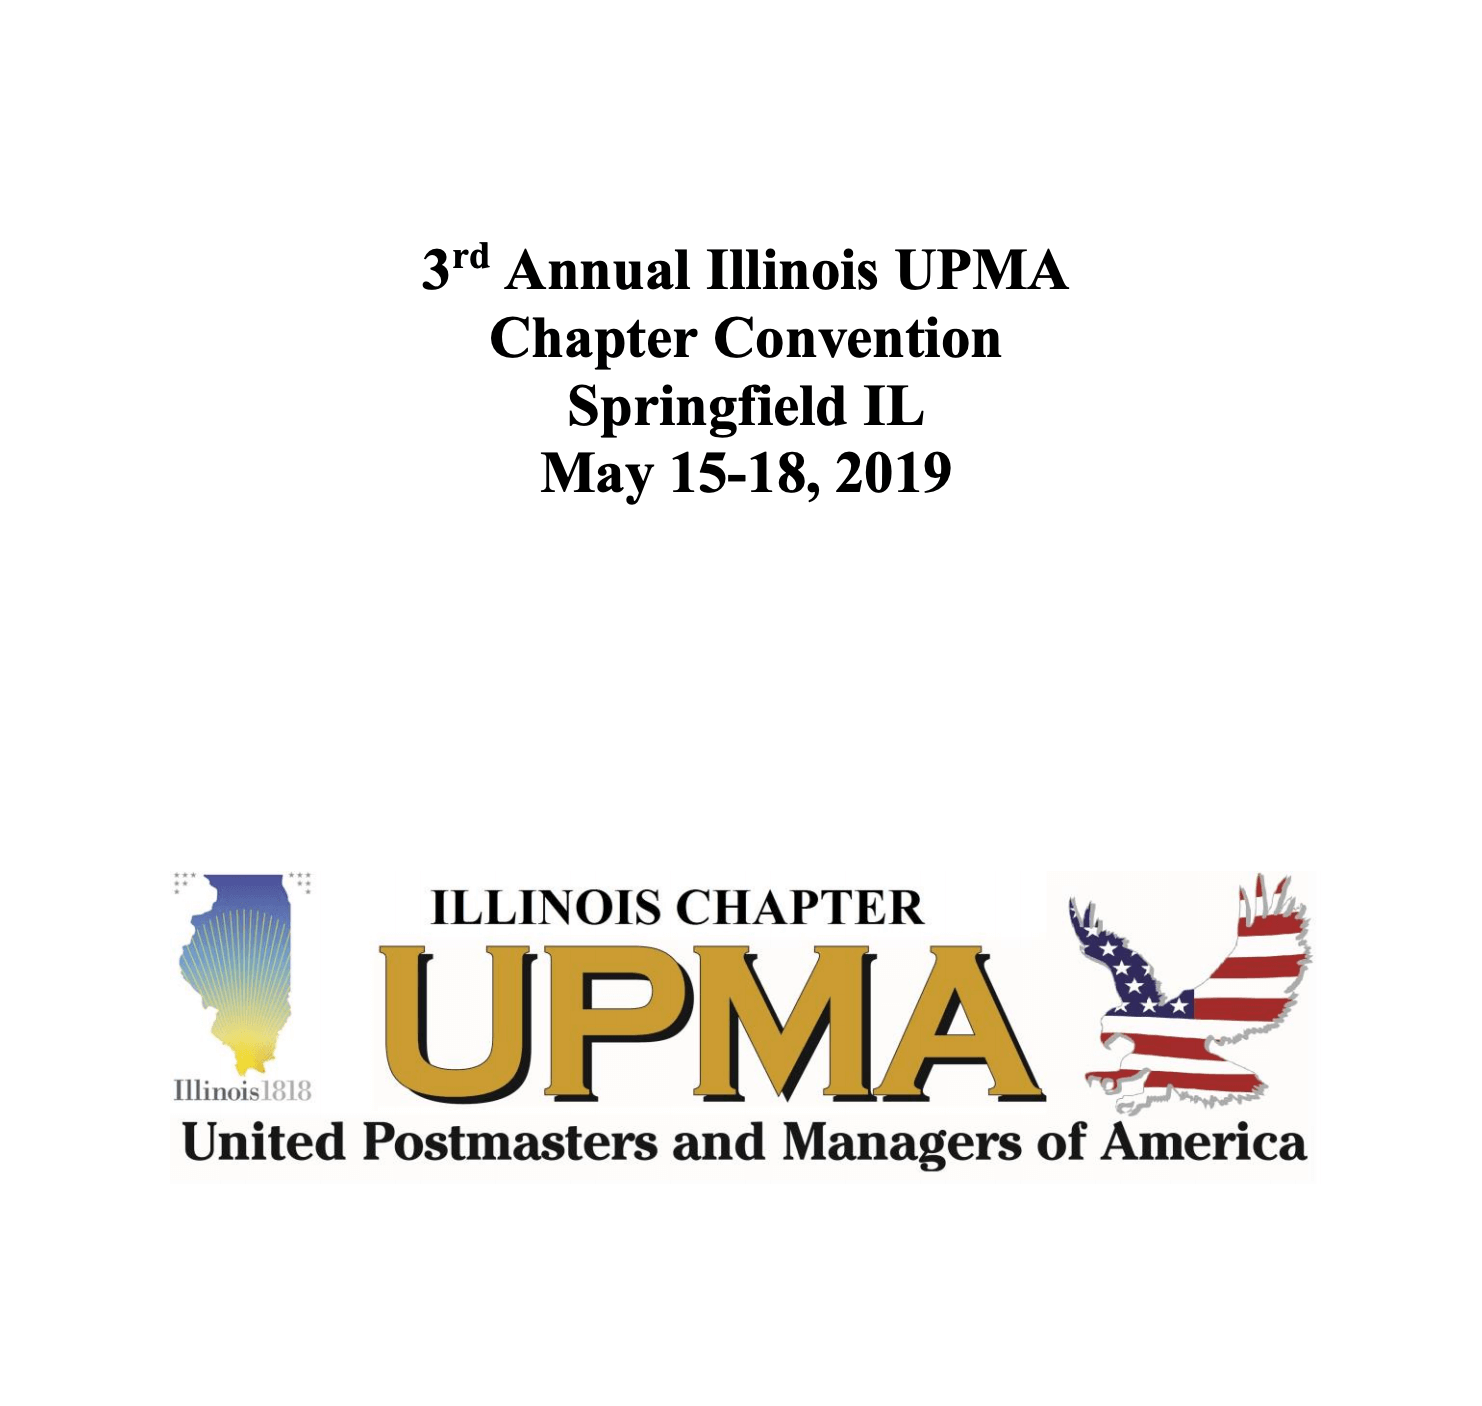 Illinois UPMA Chapter Convention Guide - 2019